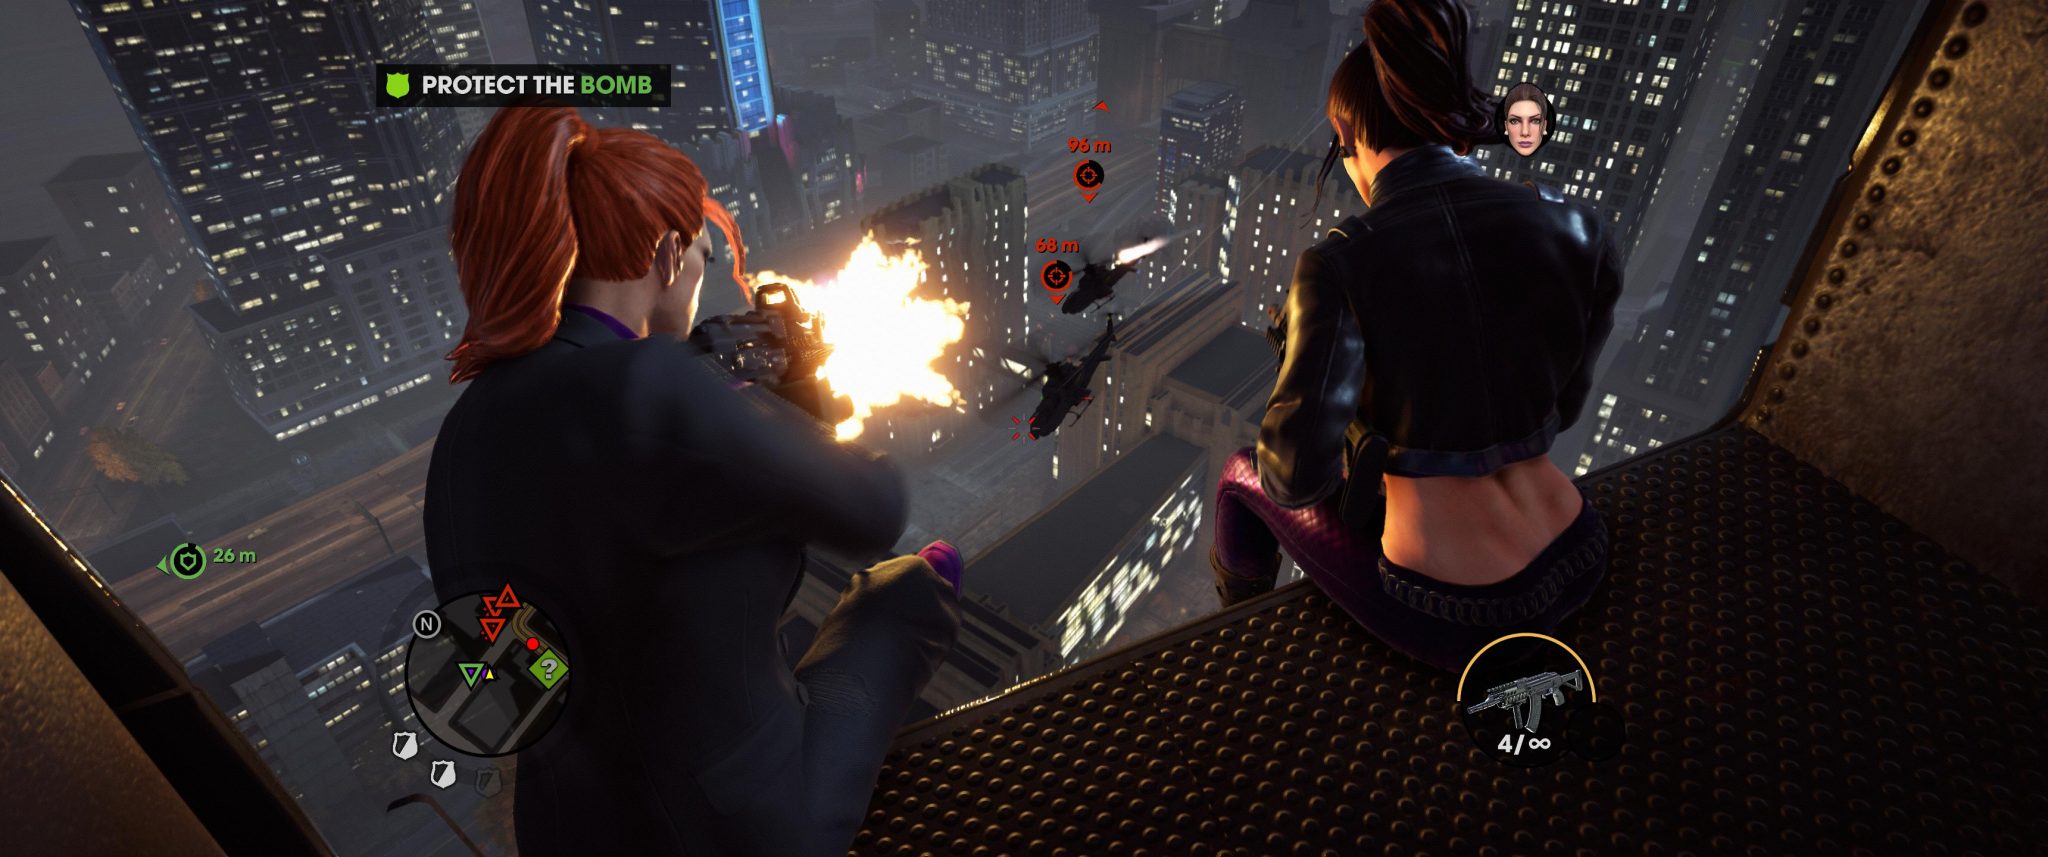 Saints Row: The Third Remastered announced & coming May 2020